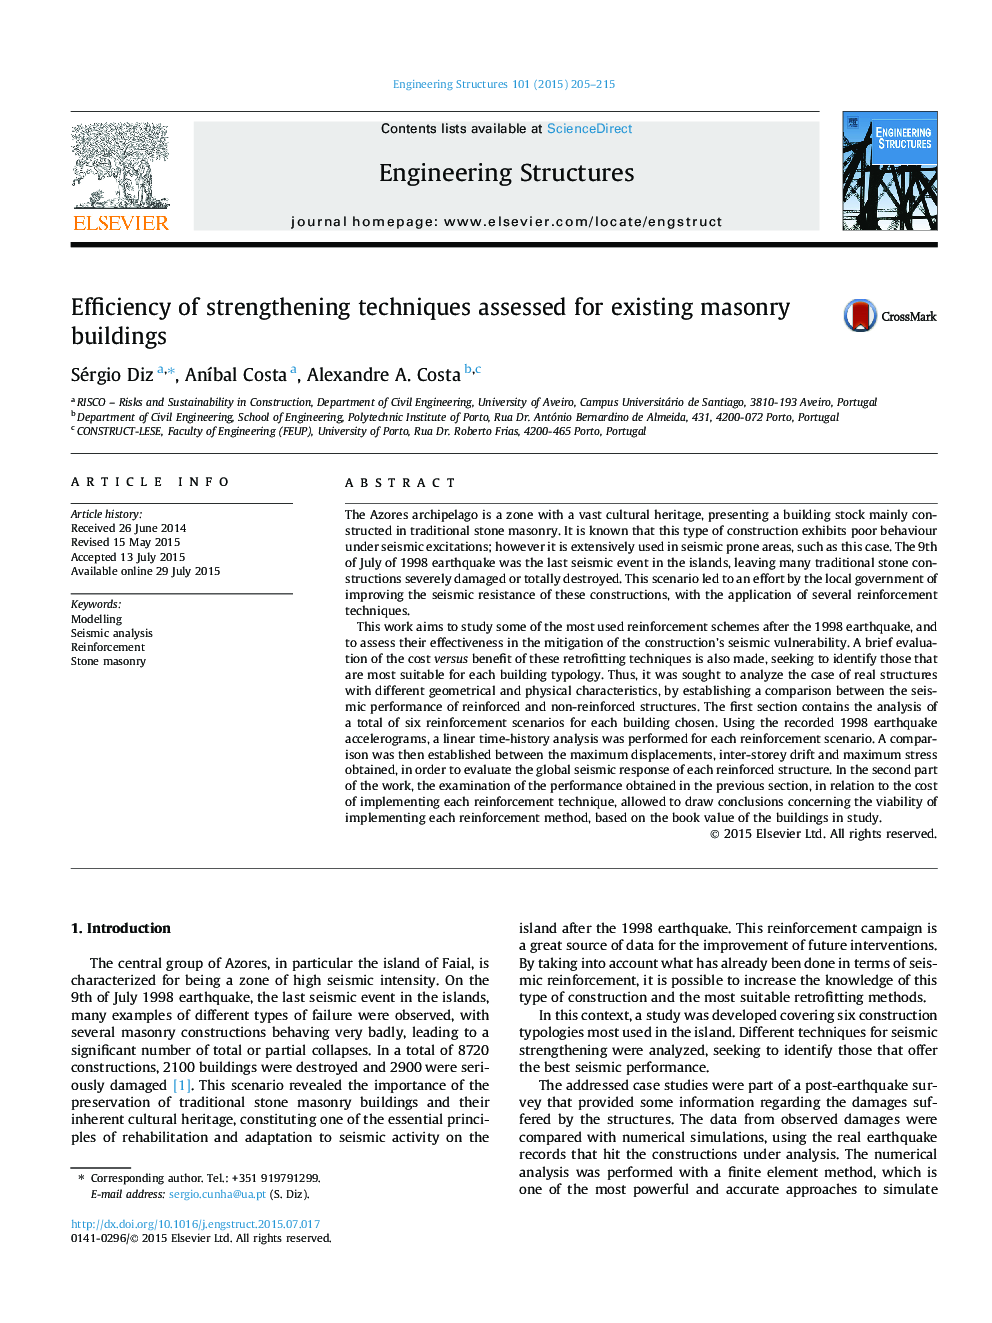 Efficiency of strengthening techniques assessed for existing masonry buildings